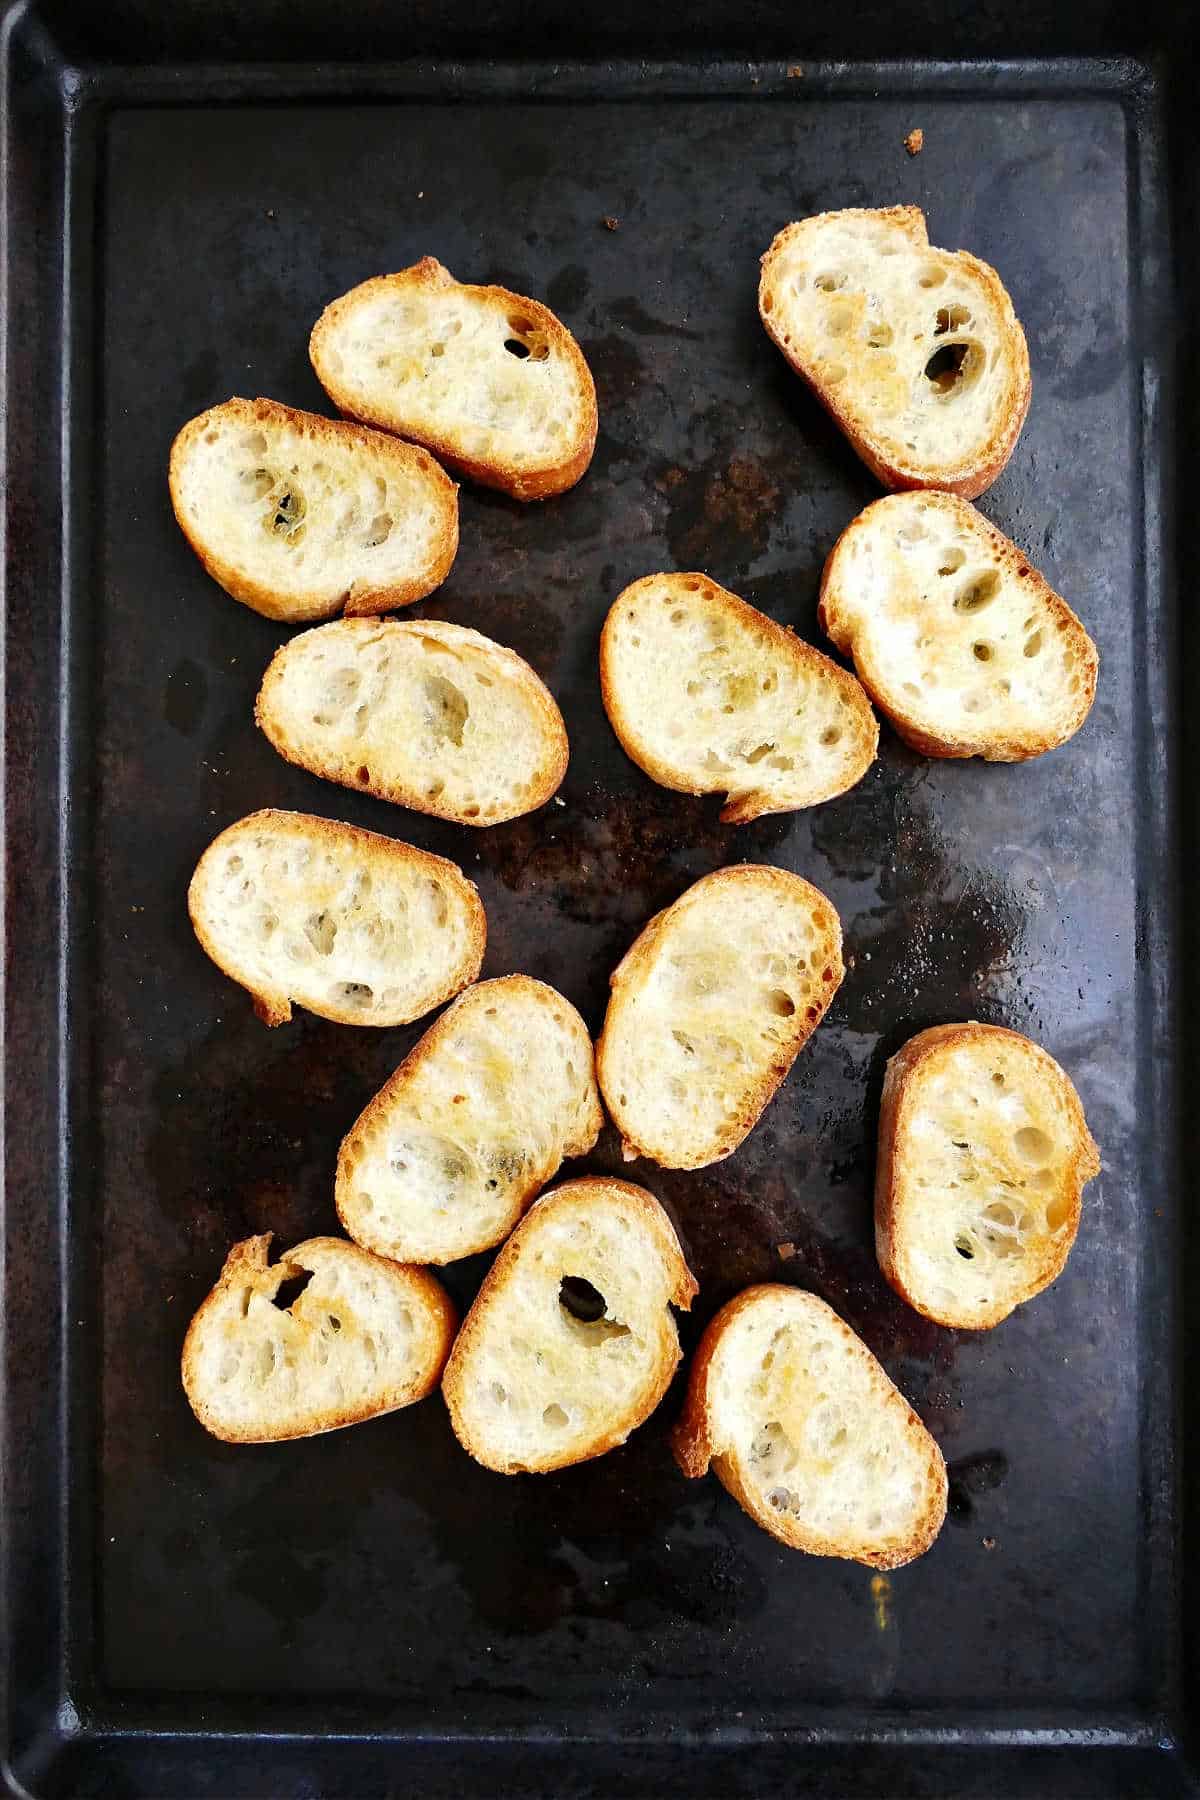 baguette slices spread with oil and toasted on a baking sheet